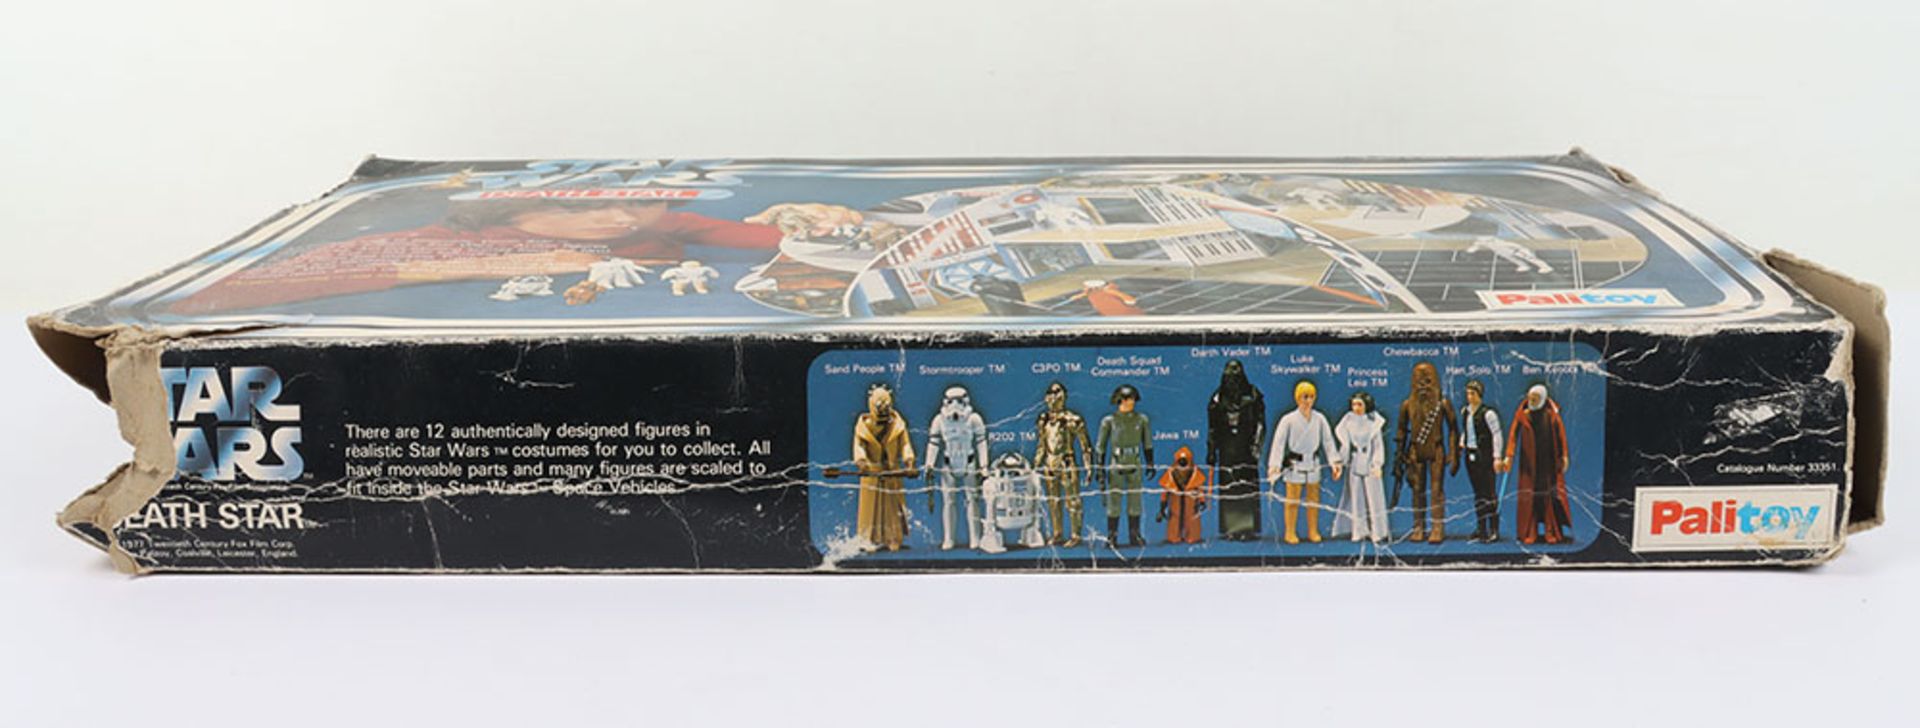 Scarce Palitoy Vintage Star Wars Death Star Play Centre - Image 10 of 12